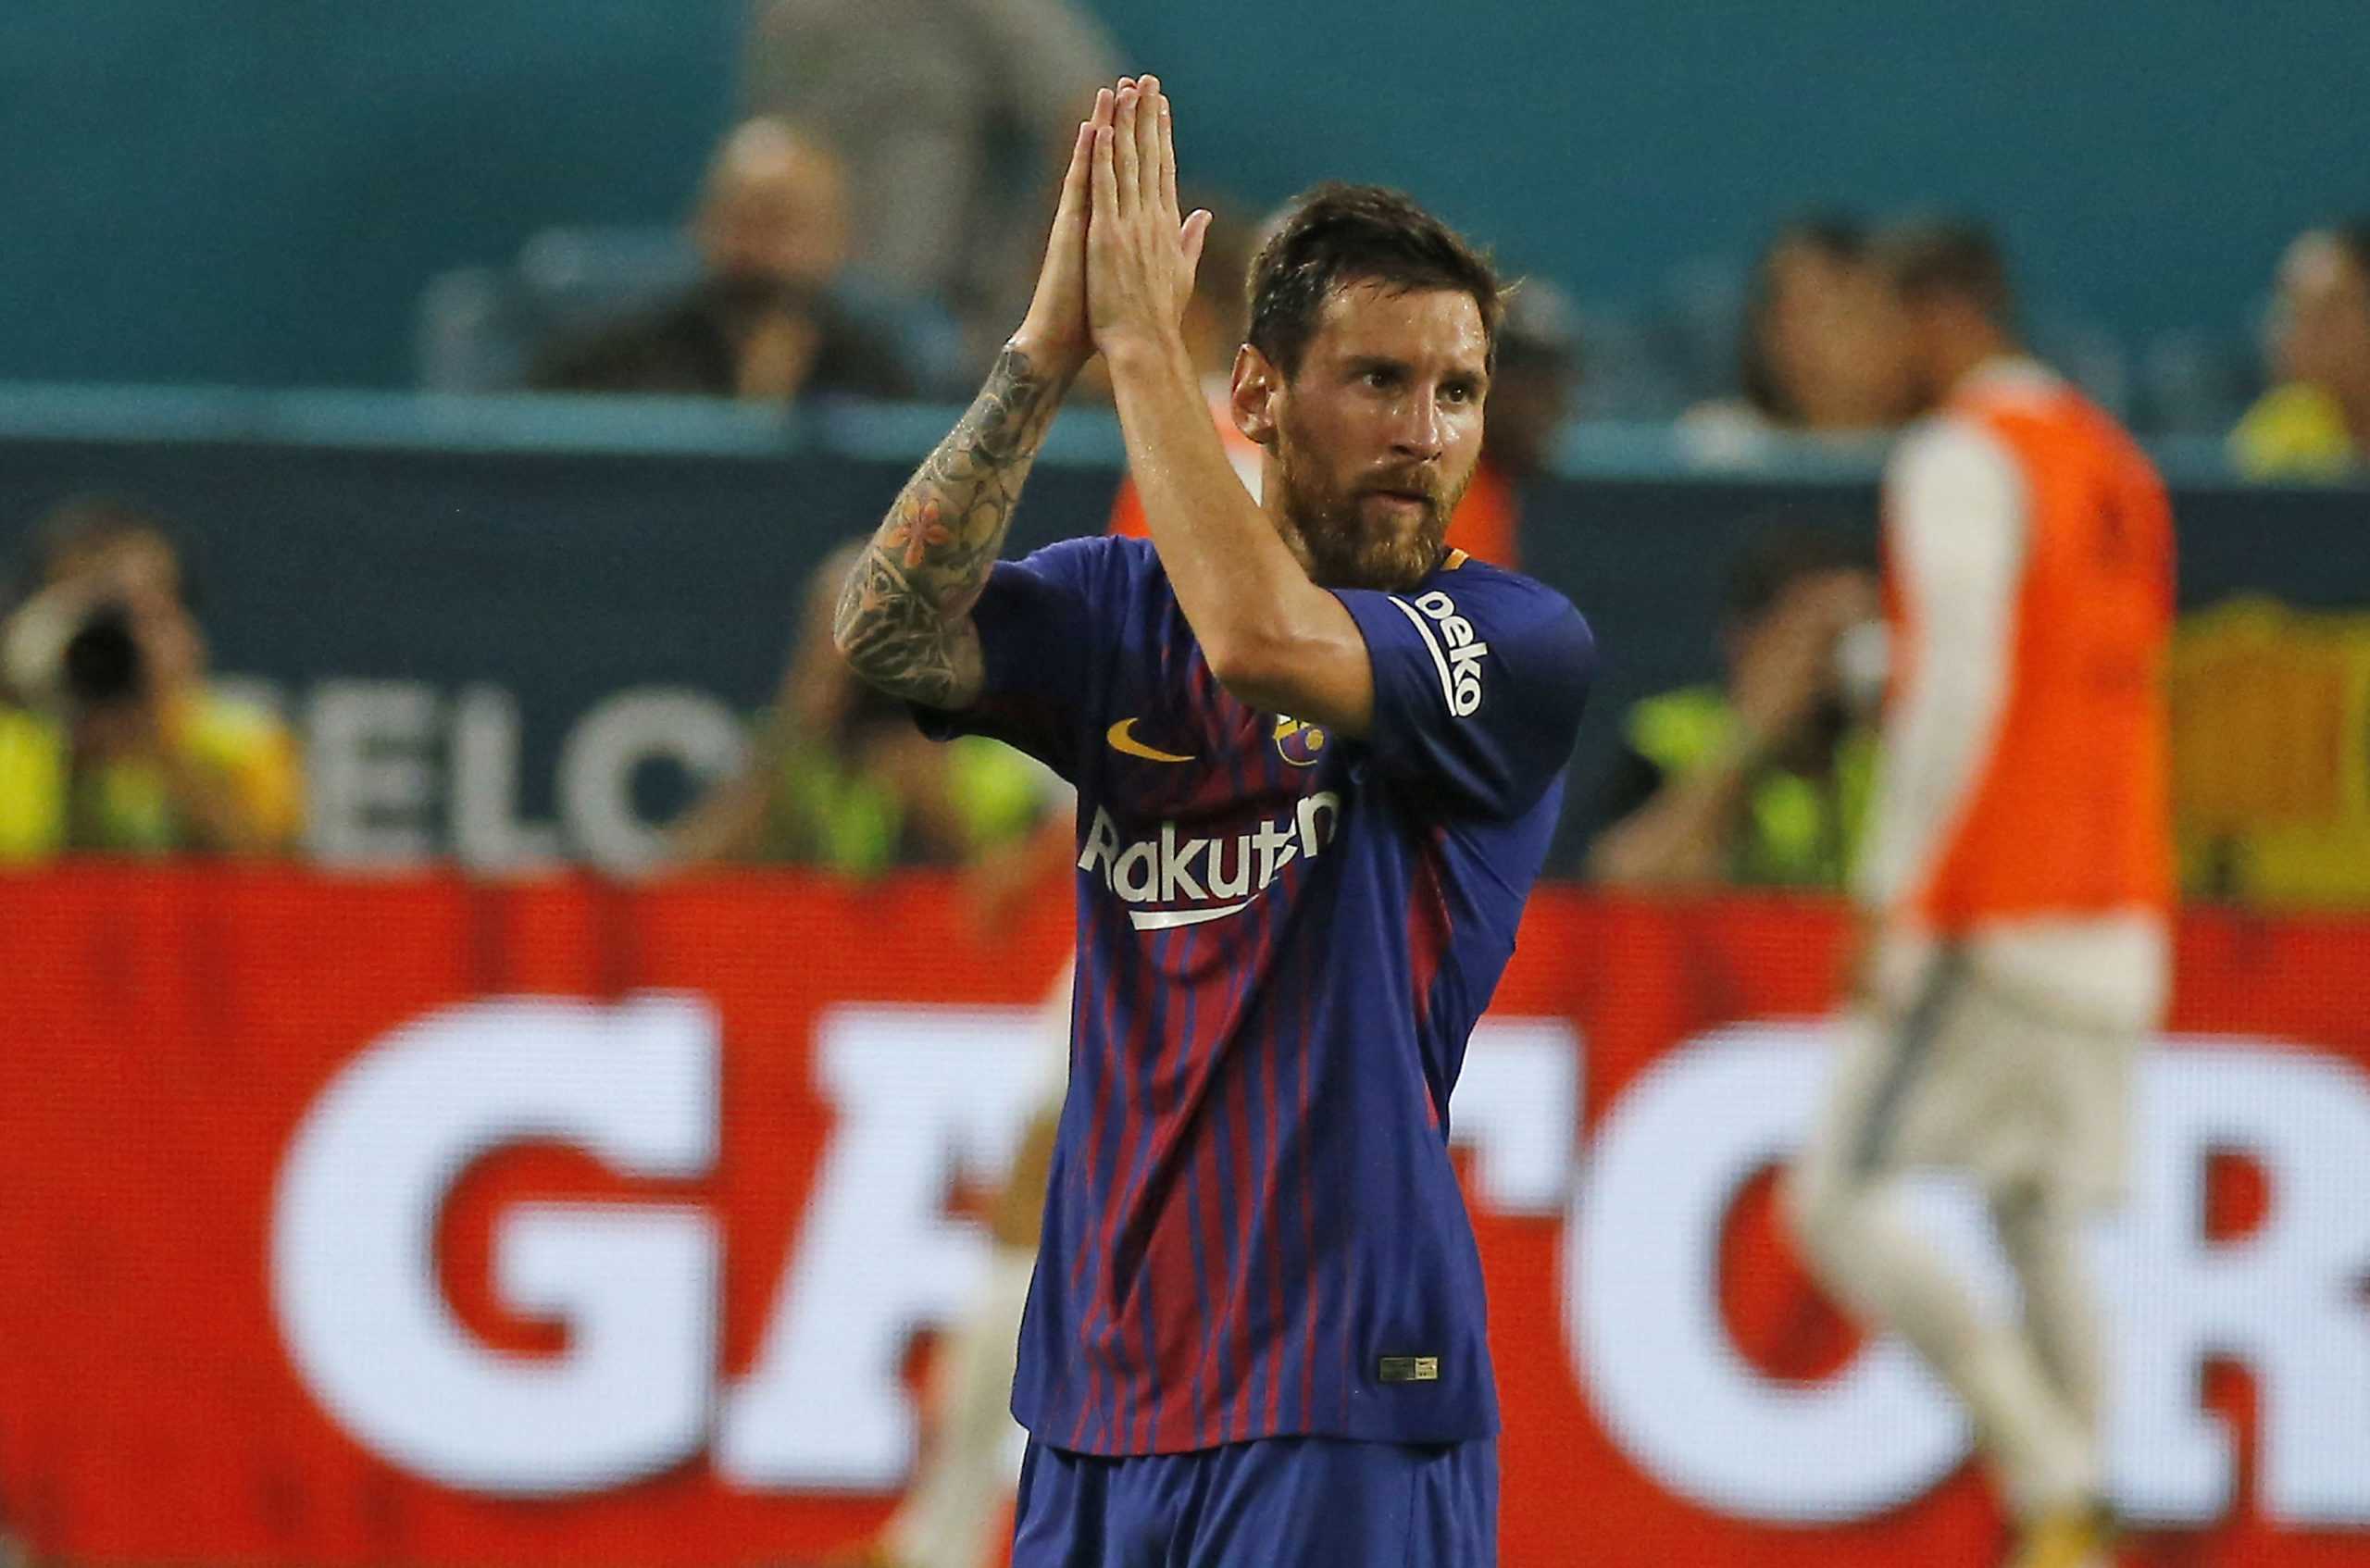 Barcelona forward Lionel Messi greets the fans after he left the game during the second half against Real Madrid in an International Champions Cup match on Saturday, July 29, 2017, at Hard Rock Stadium in Miami Gardens, Fla. Barcelona won, 3-2. (David Santiago/El Nuevo Herald/TNS)